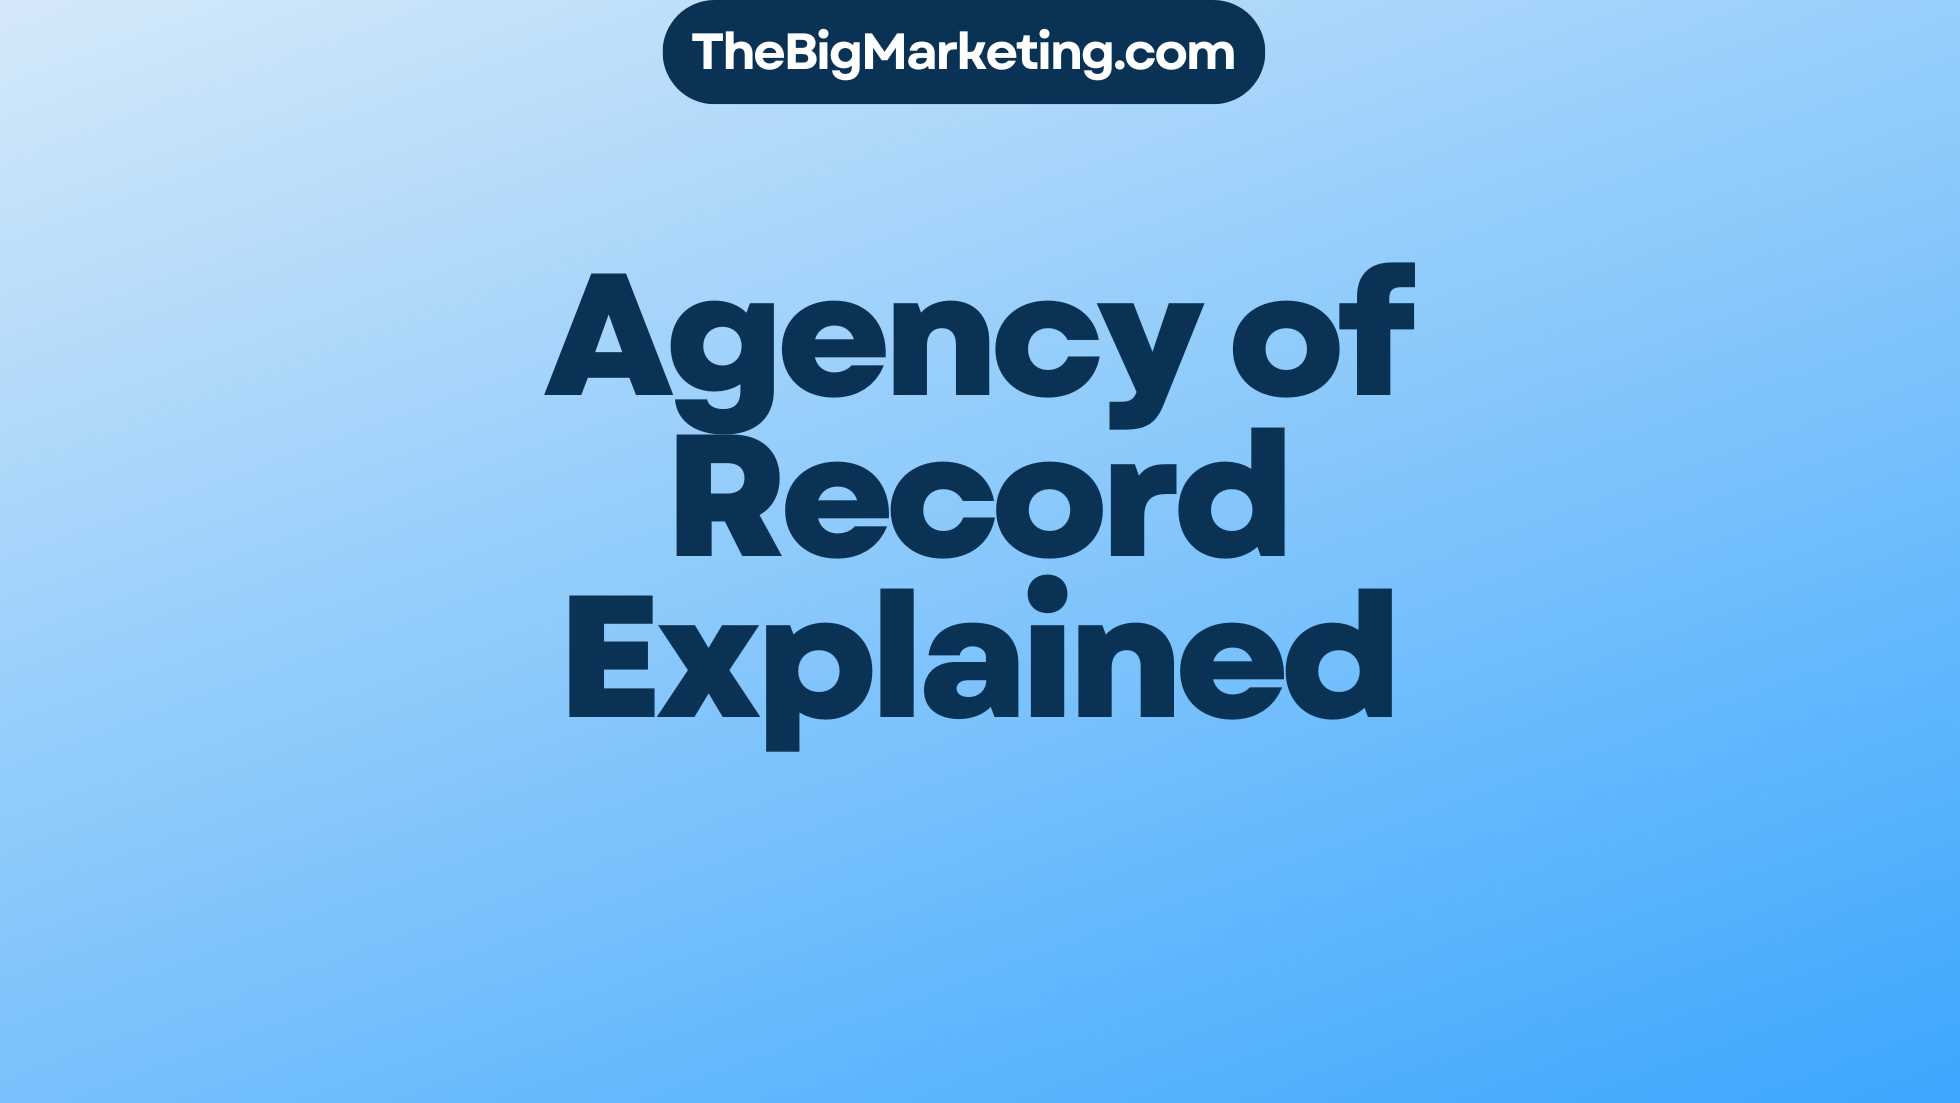 Agency of Record Explained